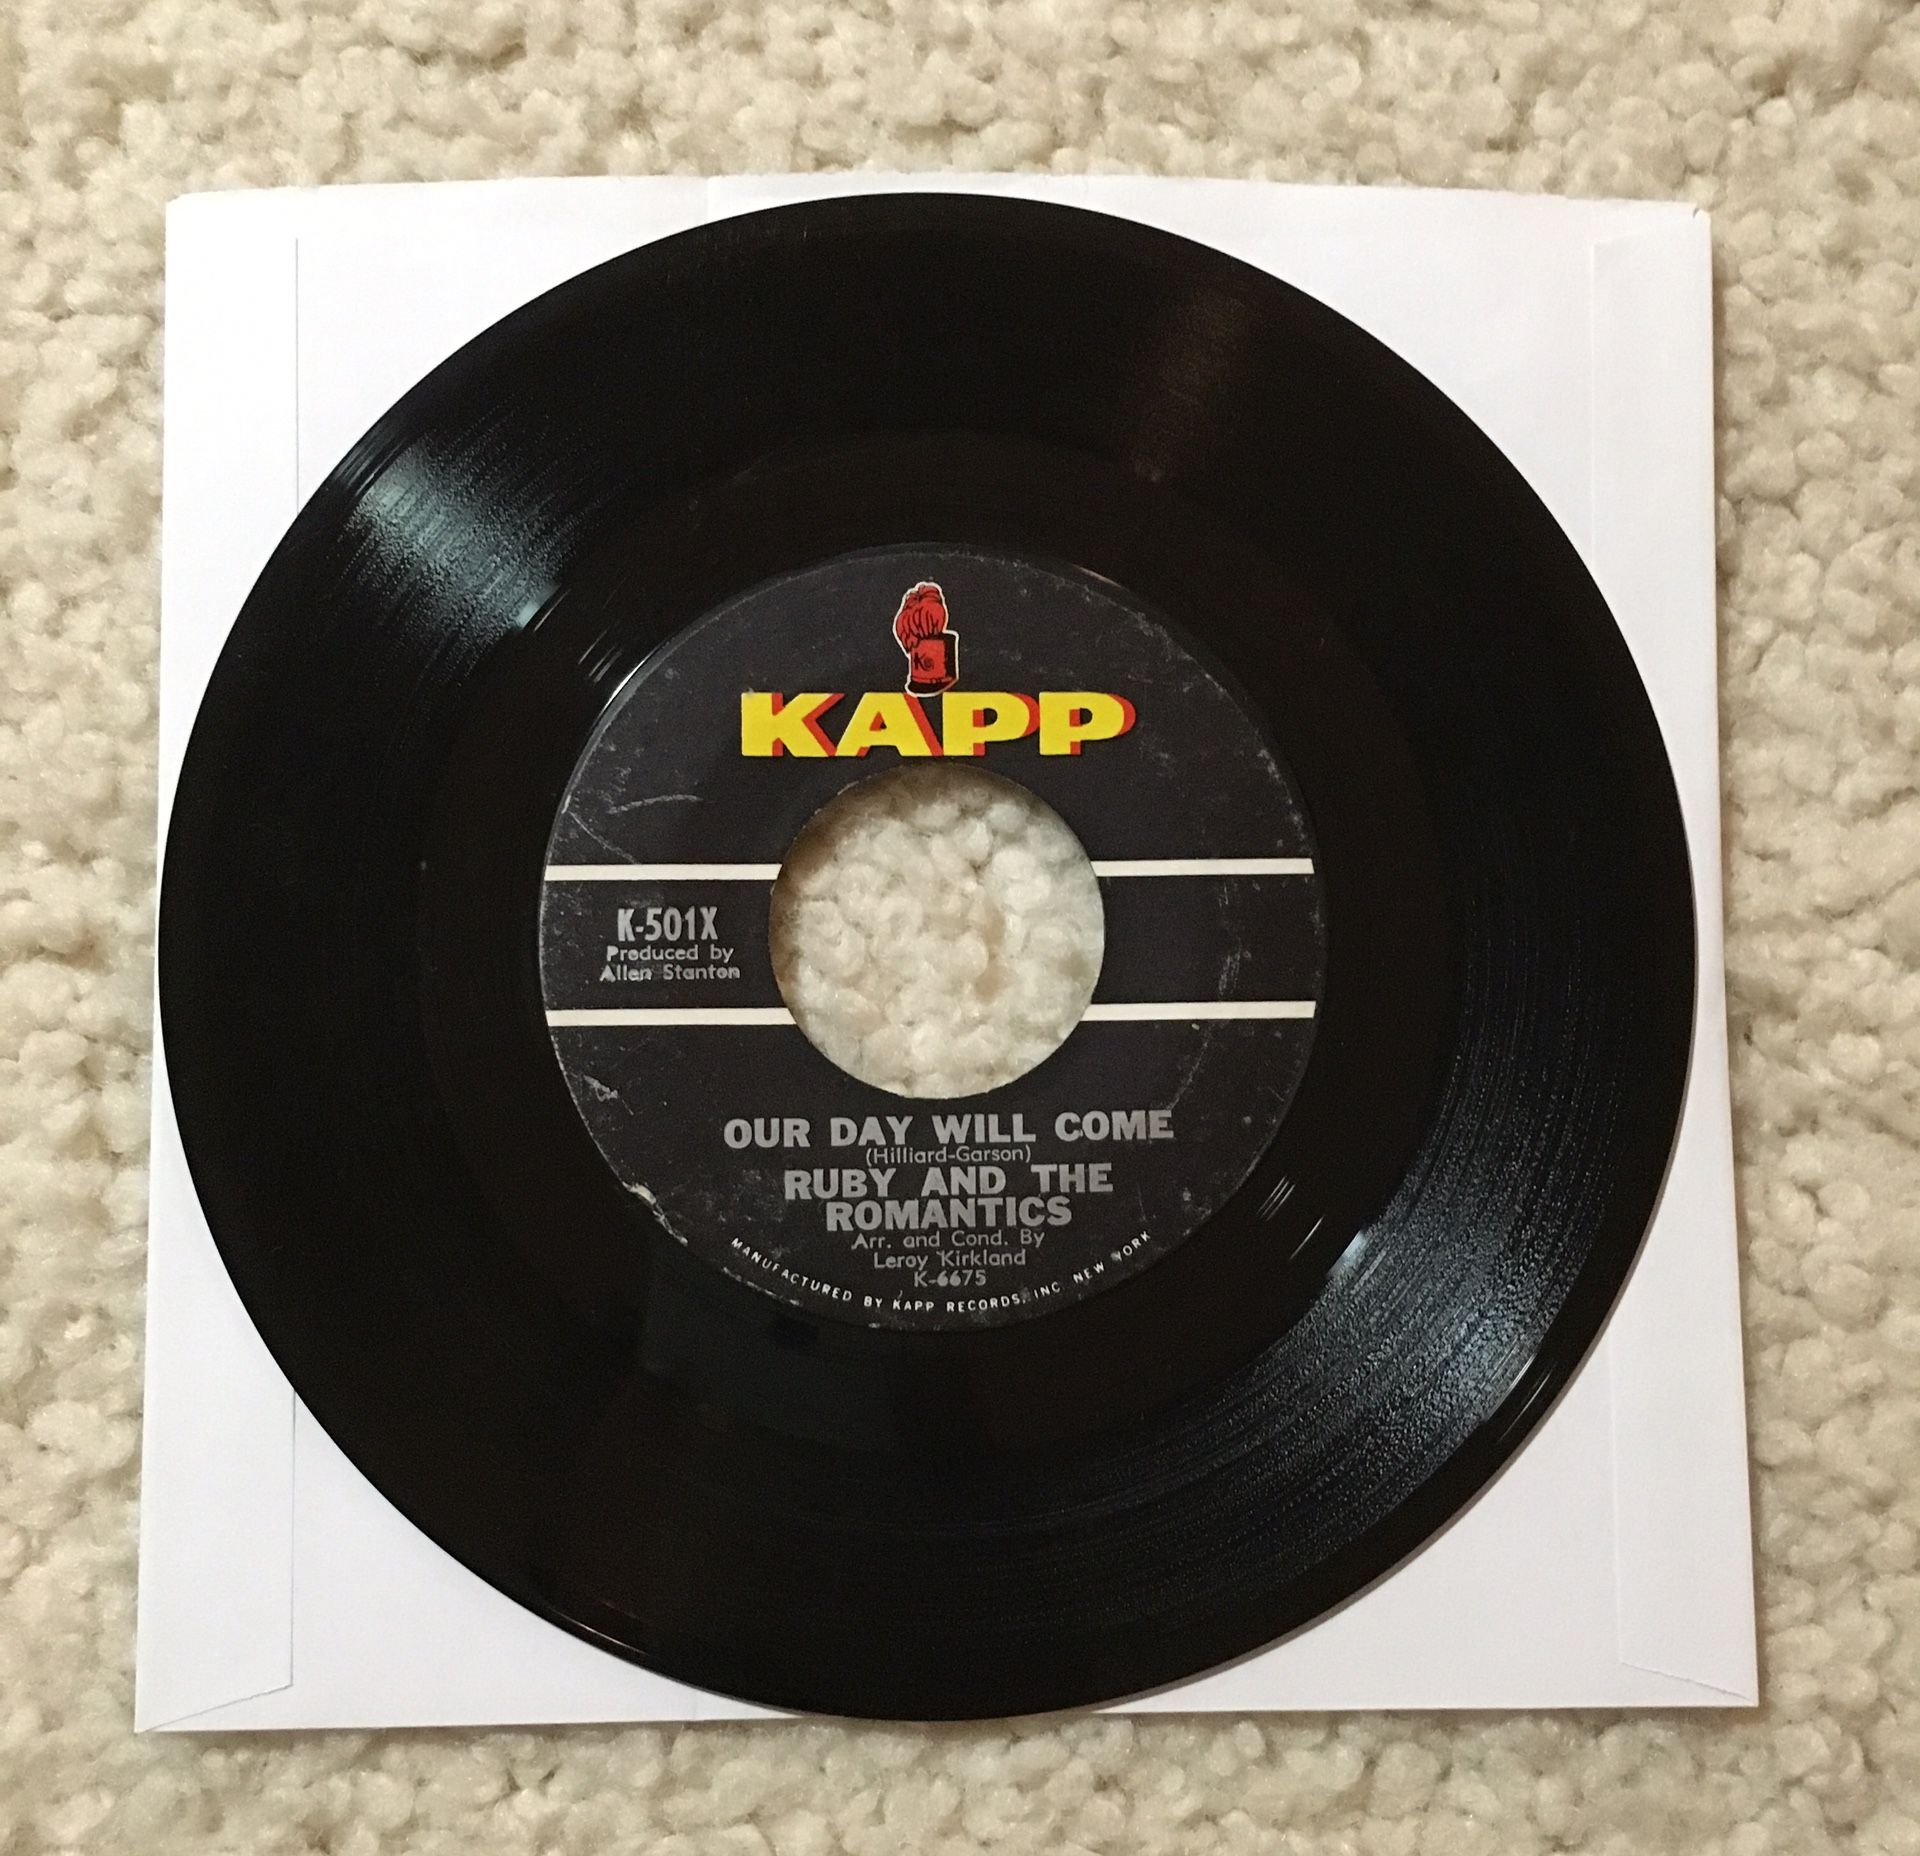 Ruby and The Romantics “Our Day Will Come” vinyl 7” single 1963 Kapp Records rare Original 1st Mono Not Stereo Pressing not a reissue R&B